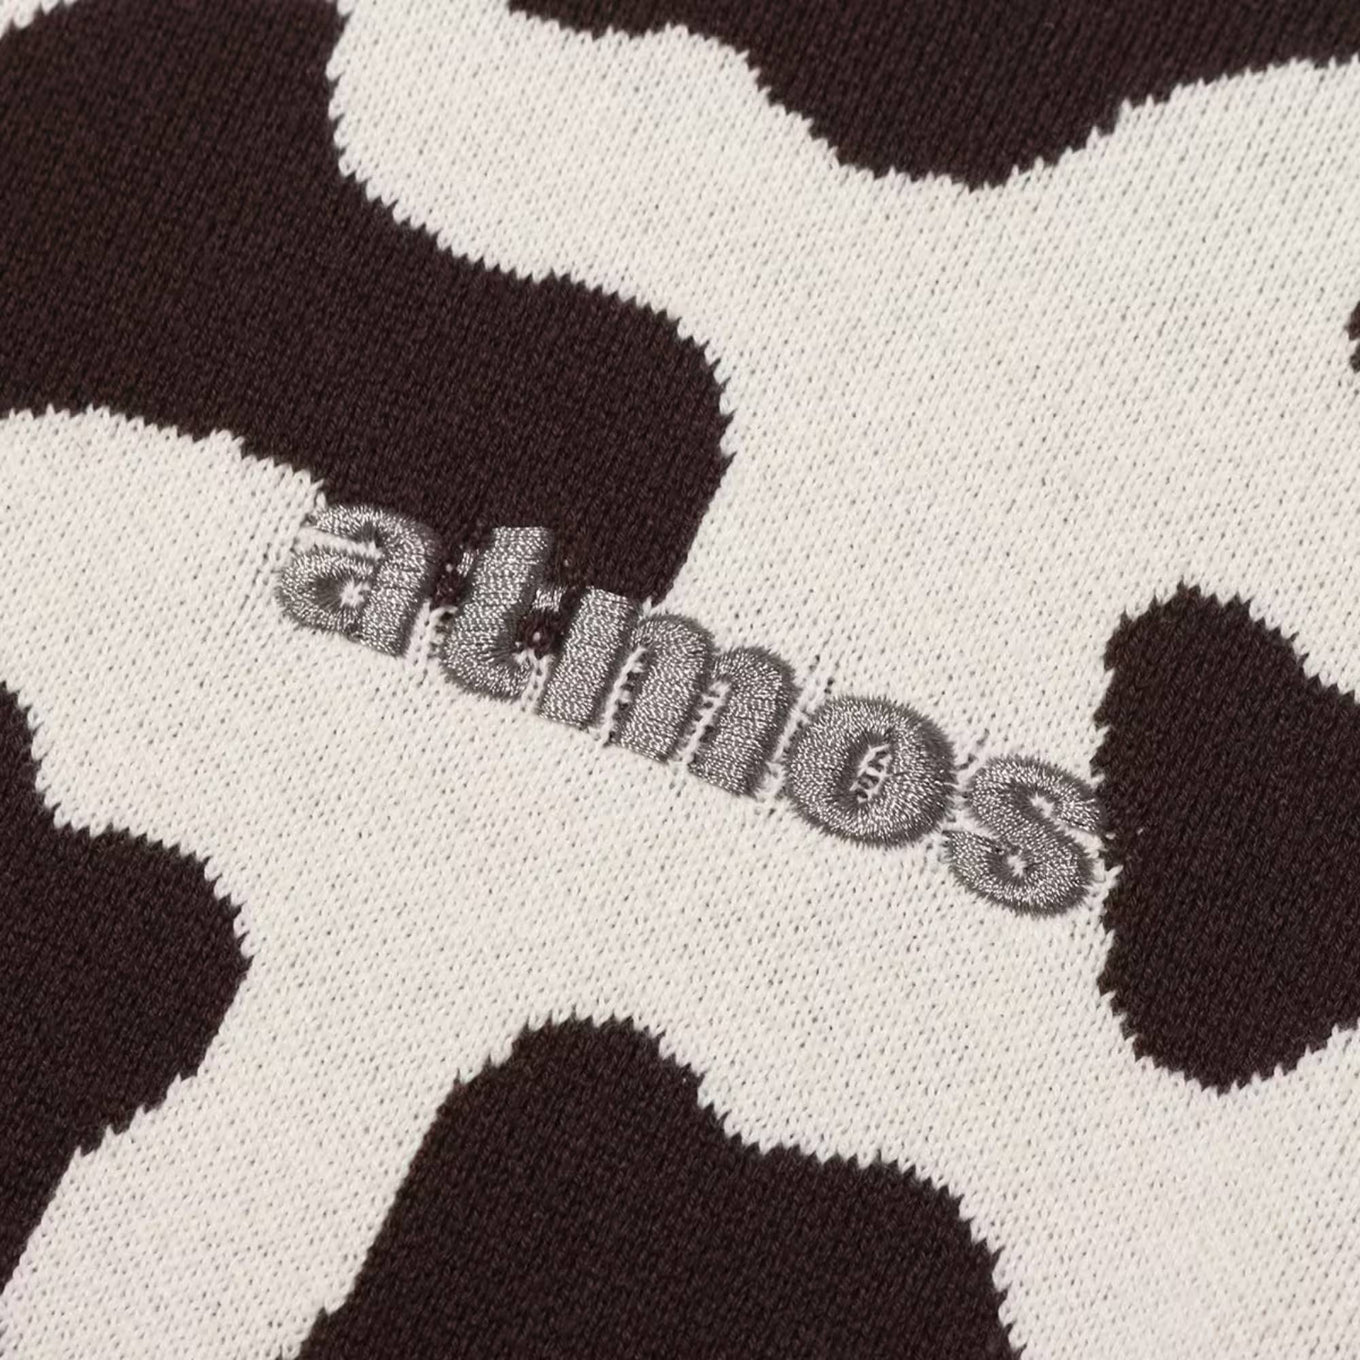 ATMOS EMBROIDERY CLASSIC LOGO KNIT SWEATER